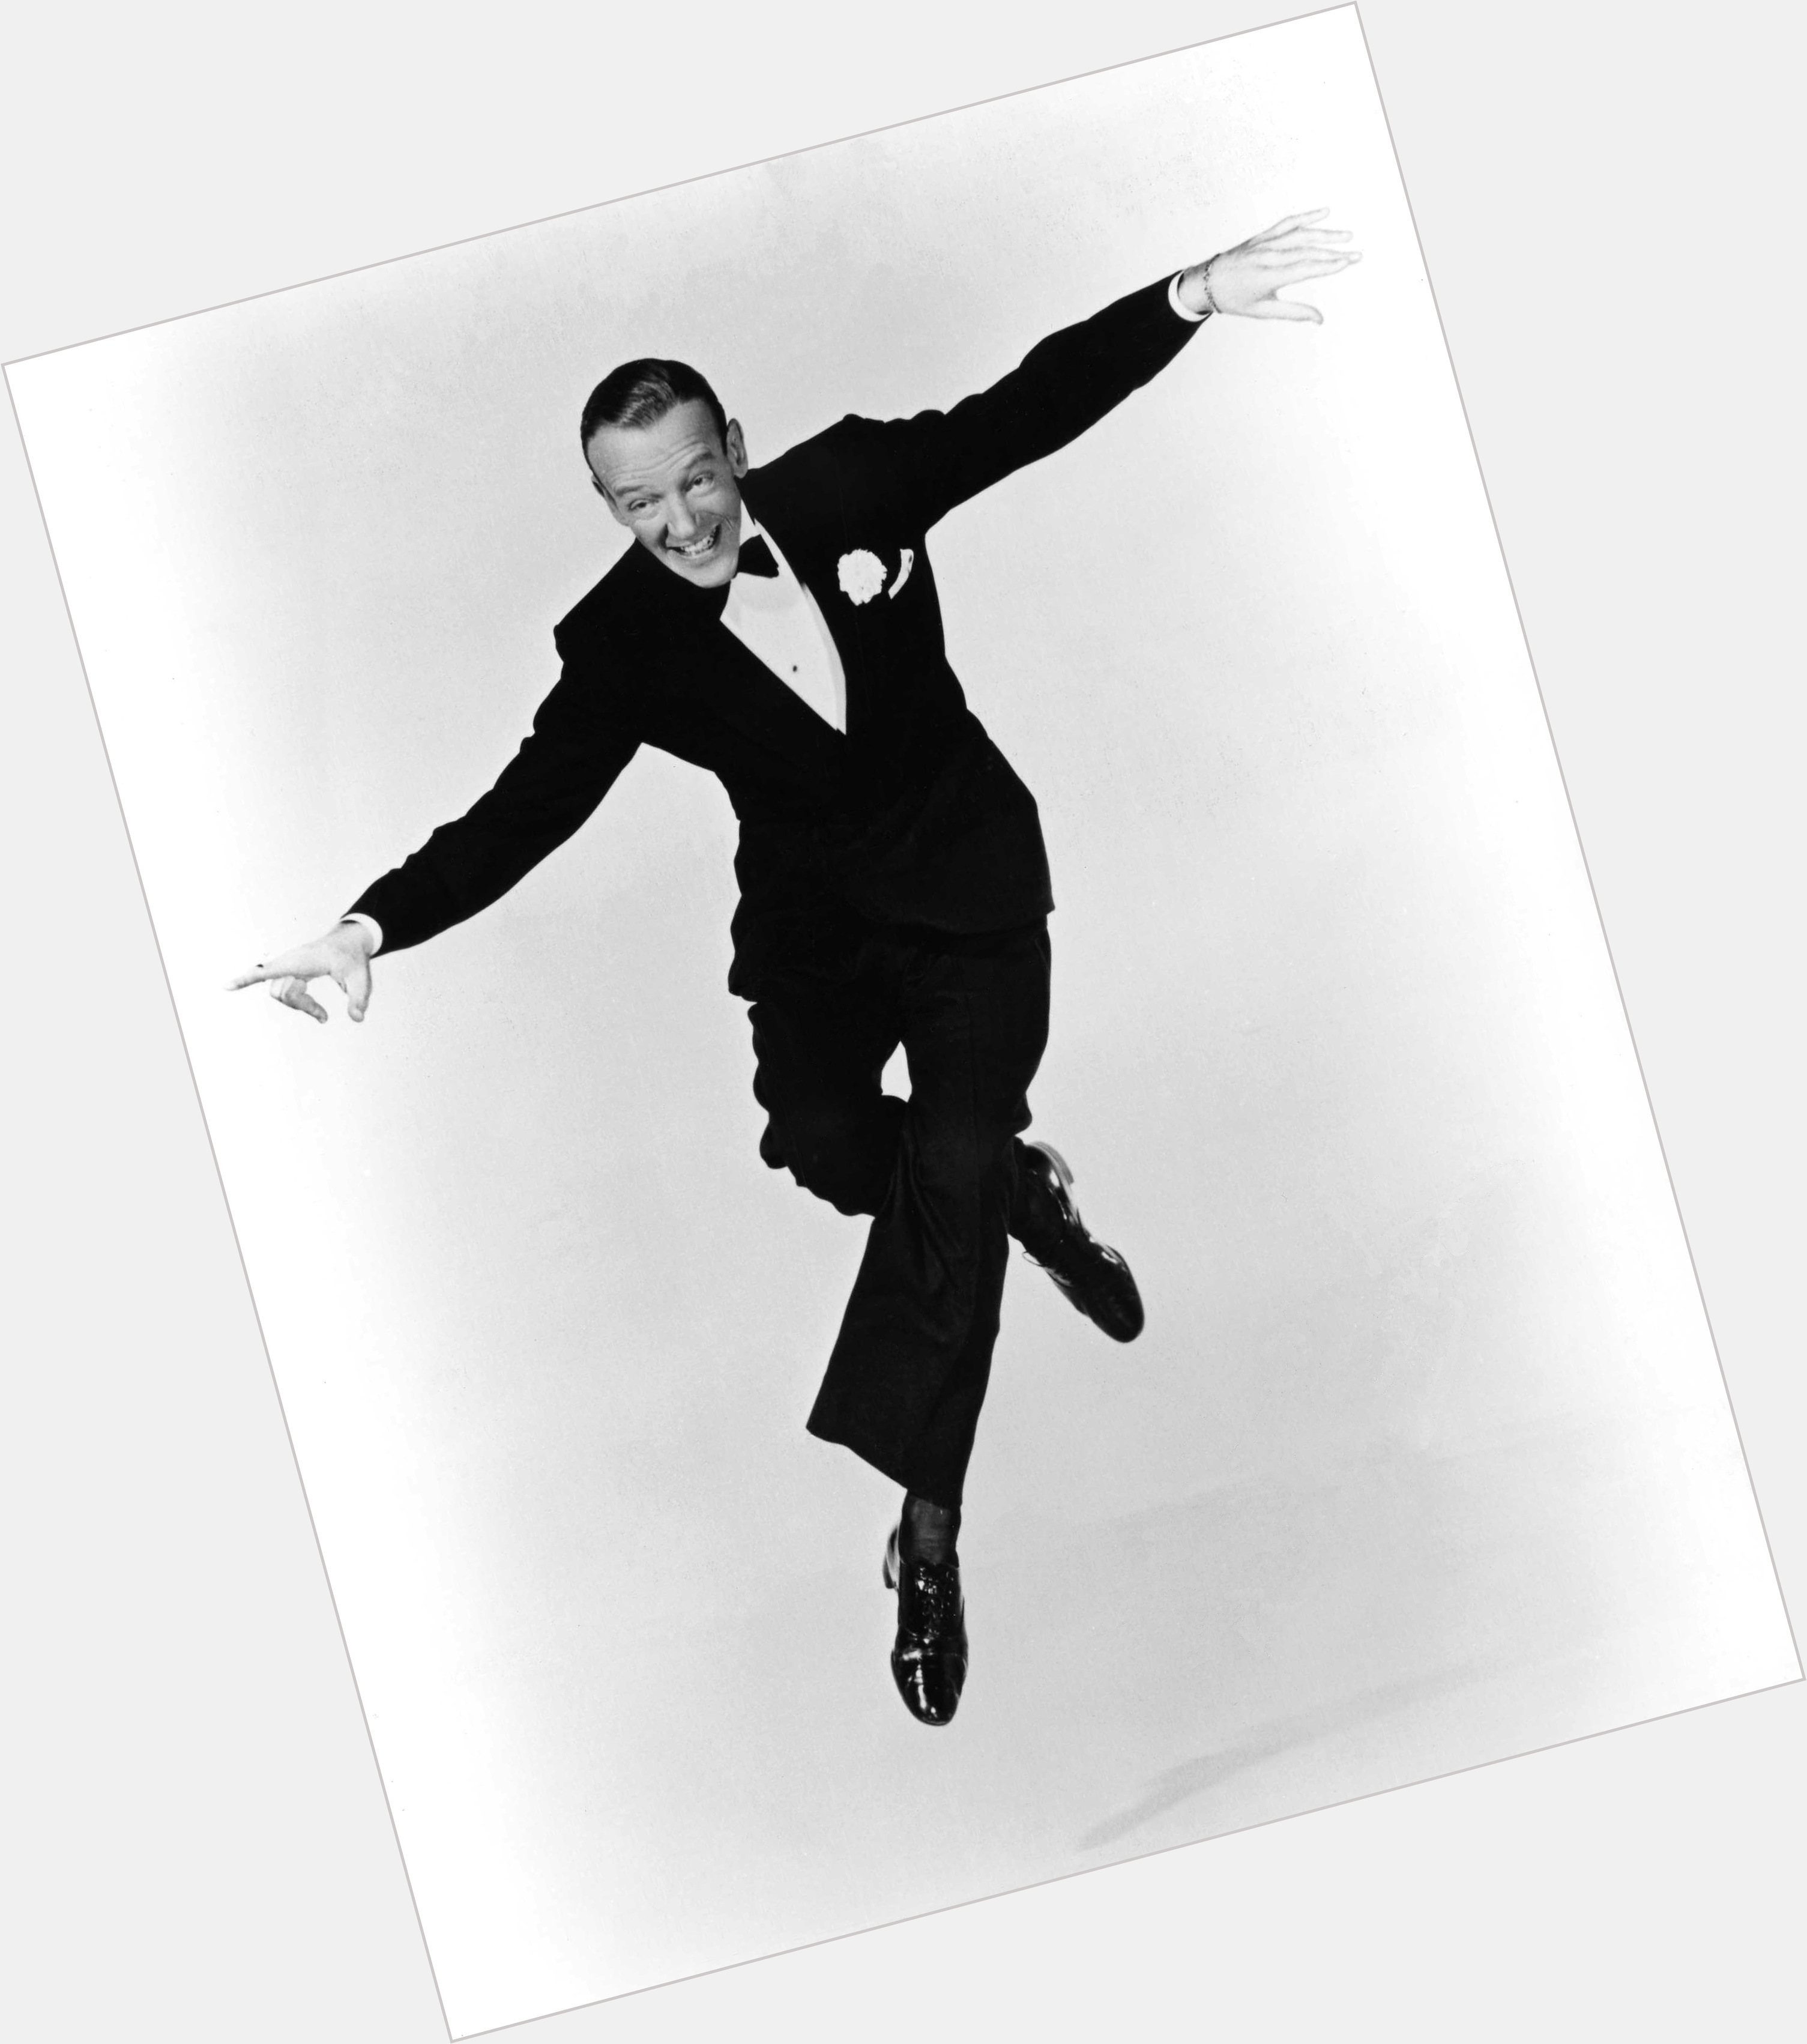 Https://fanpagepress.net/m/S/Simon Astaire Exclusive Hot Pic 3